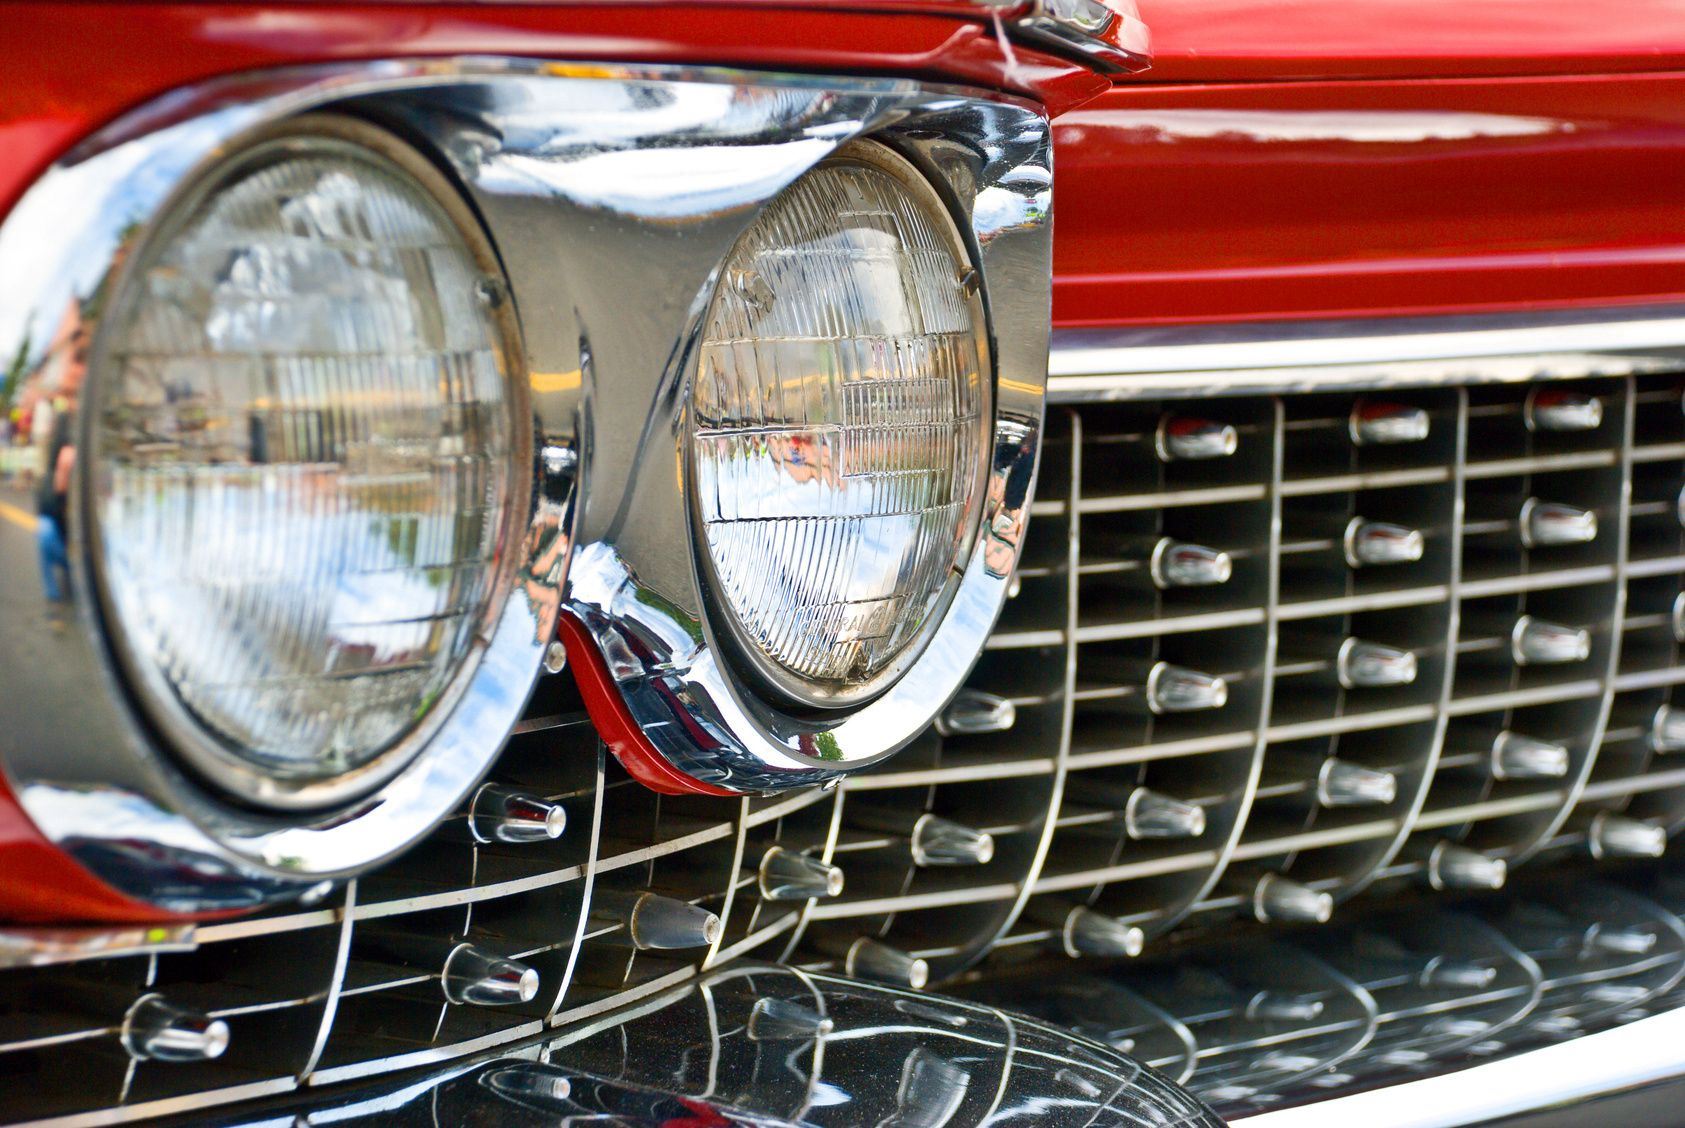 Cadillac grille